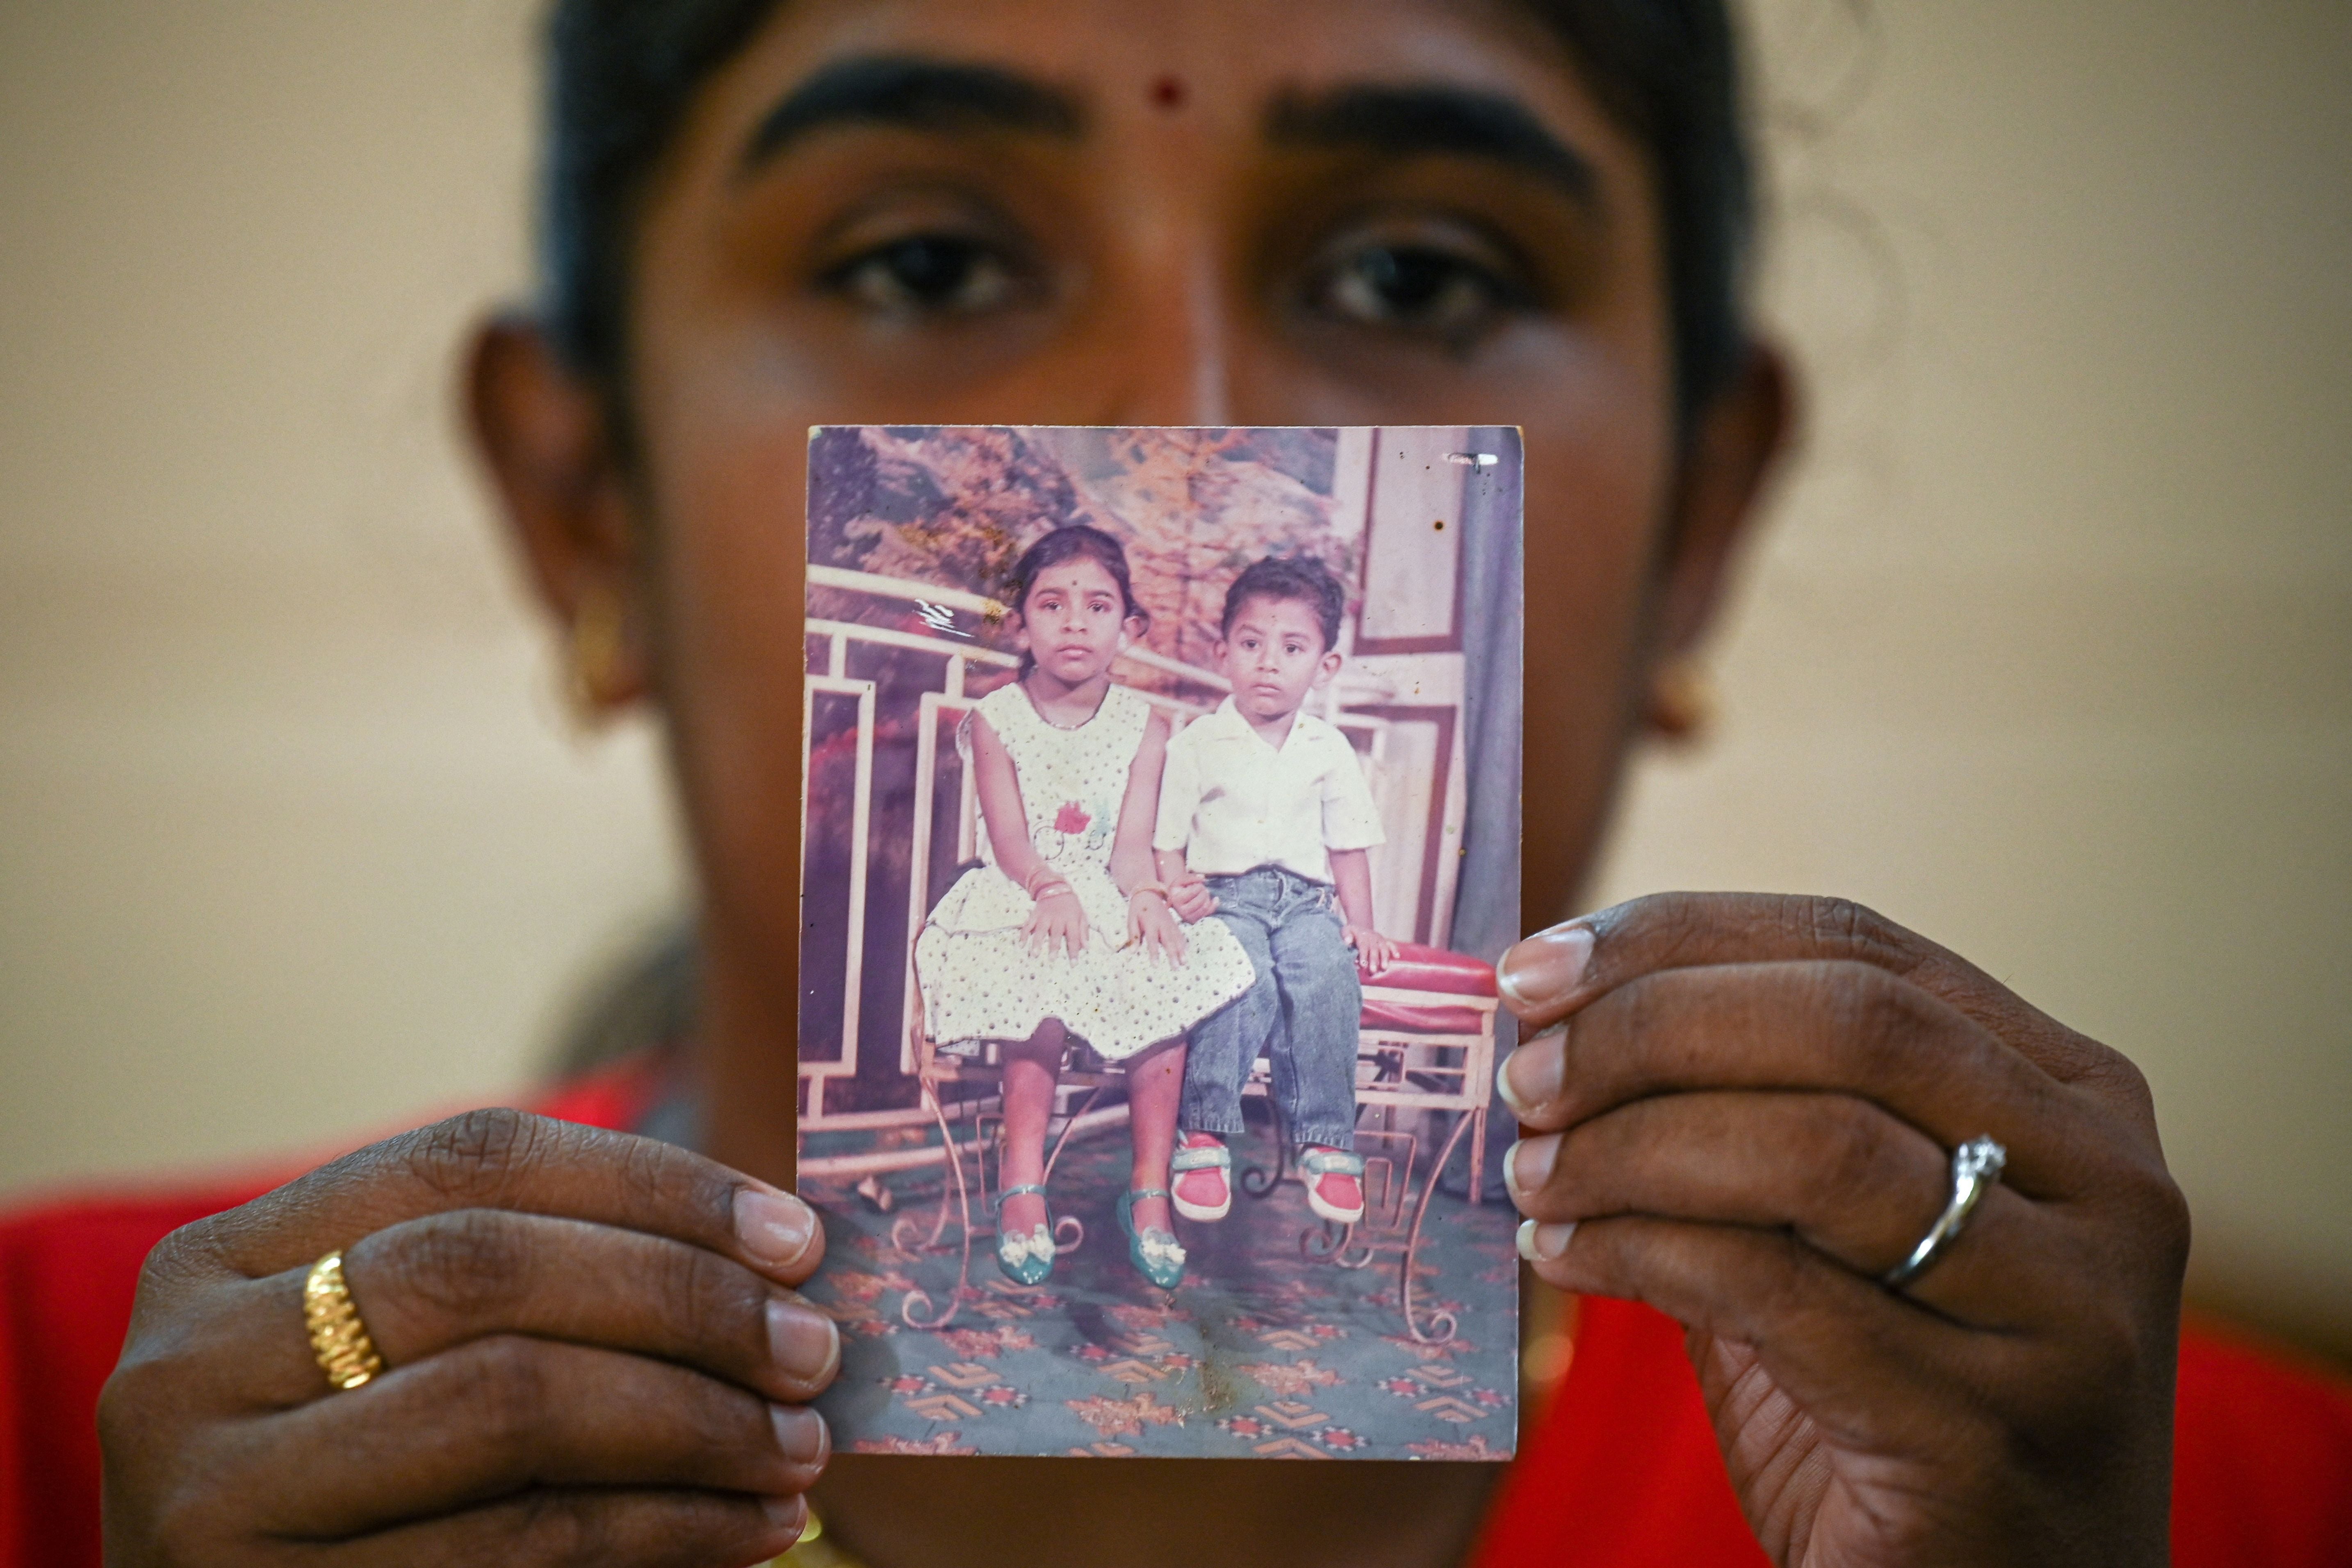 Sarmila Dharmalingam, elder sister of Nagaenthran Dharmalingam shows a photograph of herself and her brother in Malaysia’s Perak state